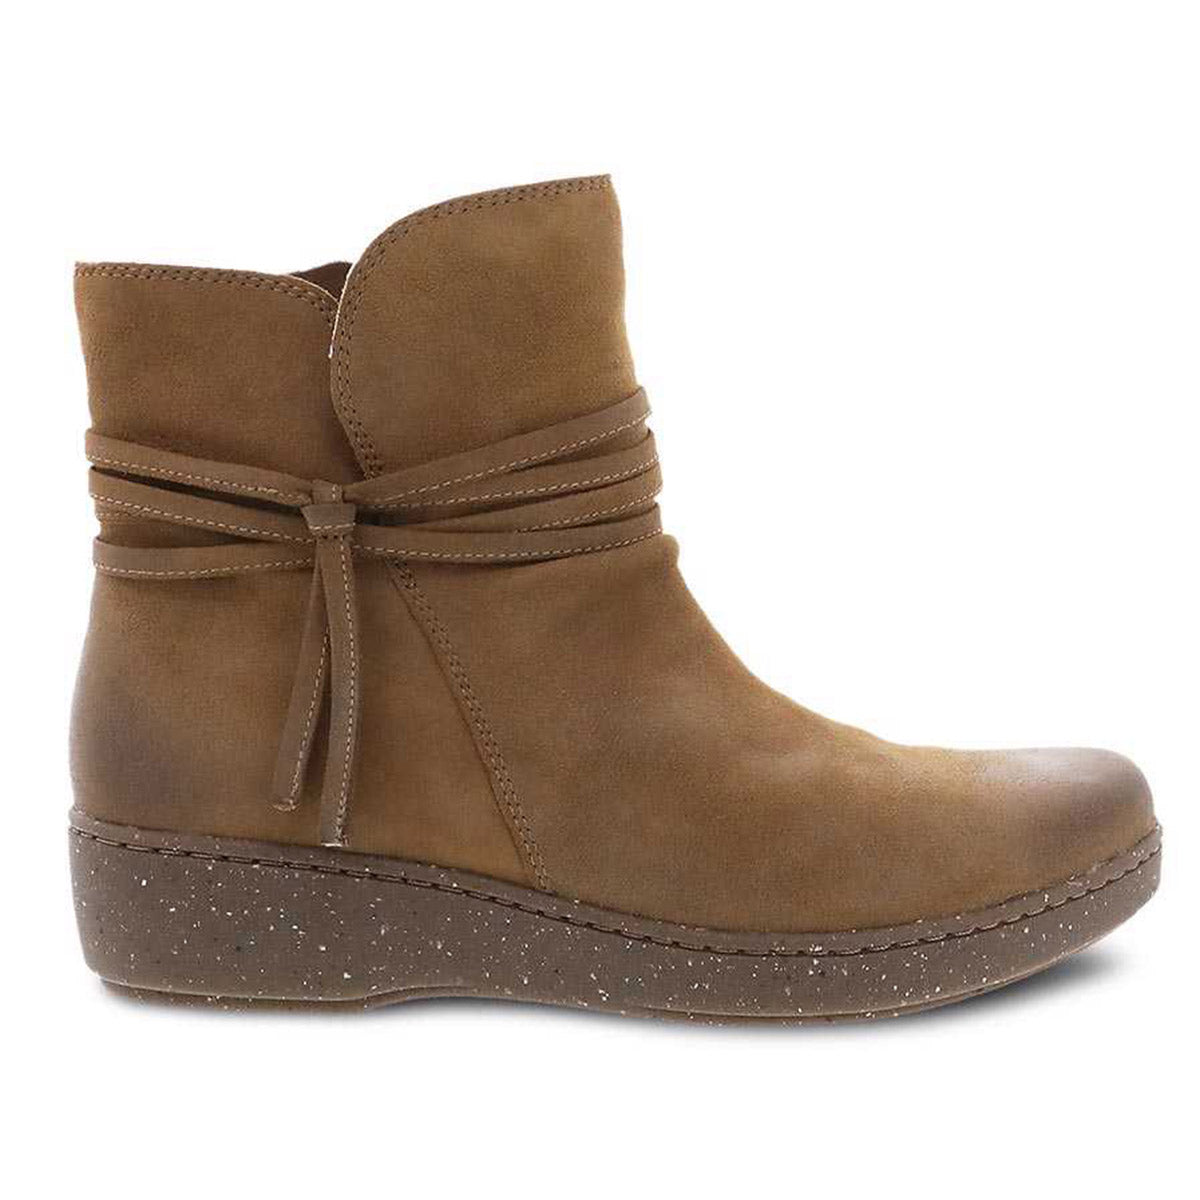 A brown suede Dansko Evelyn Biscotti Burnished Suede bootie with decorative wraparound lacing and studded detail on the sole, featuring 3M Scotchgard protector for durability.